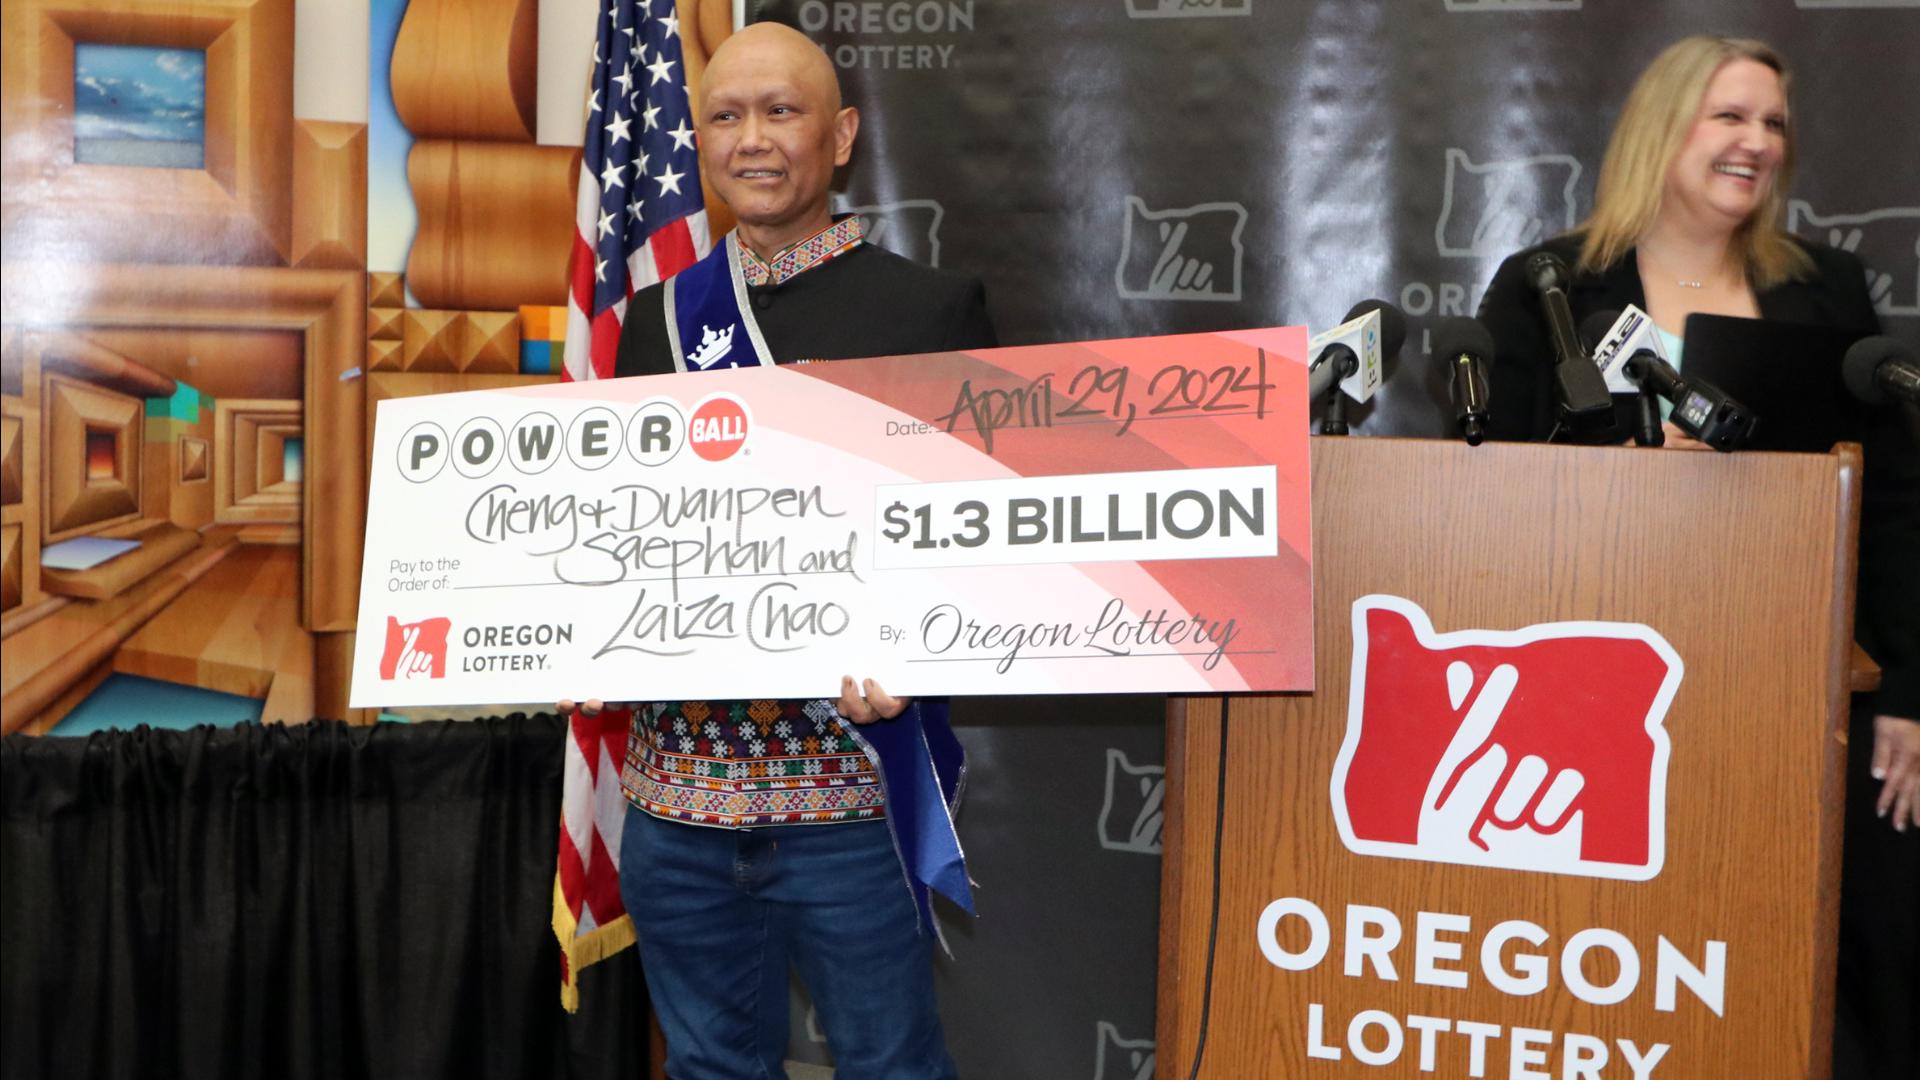 Cheng Saephan, one of three winners of the $1.3 billion Powerball jackpot, said he's been battling cancer since 2016.